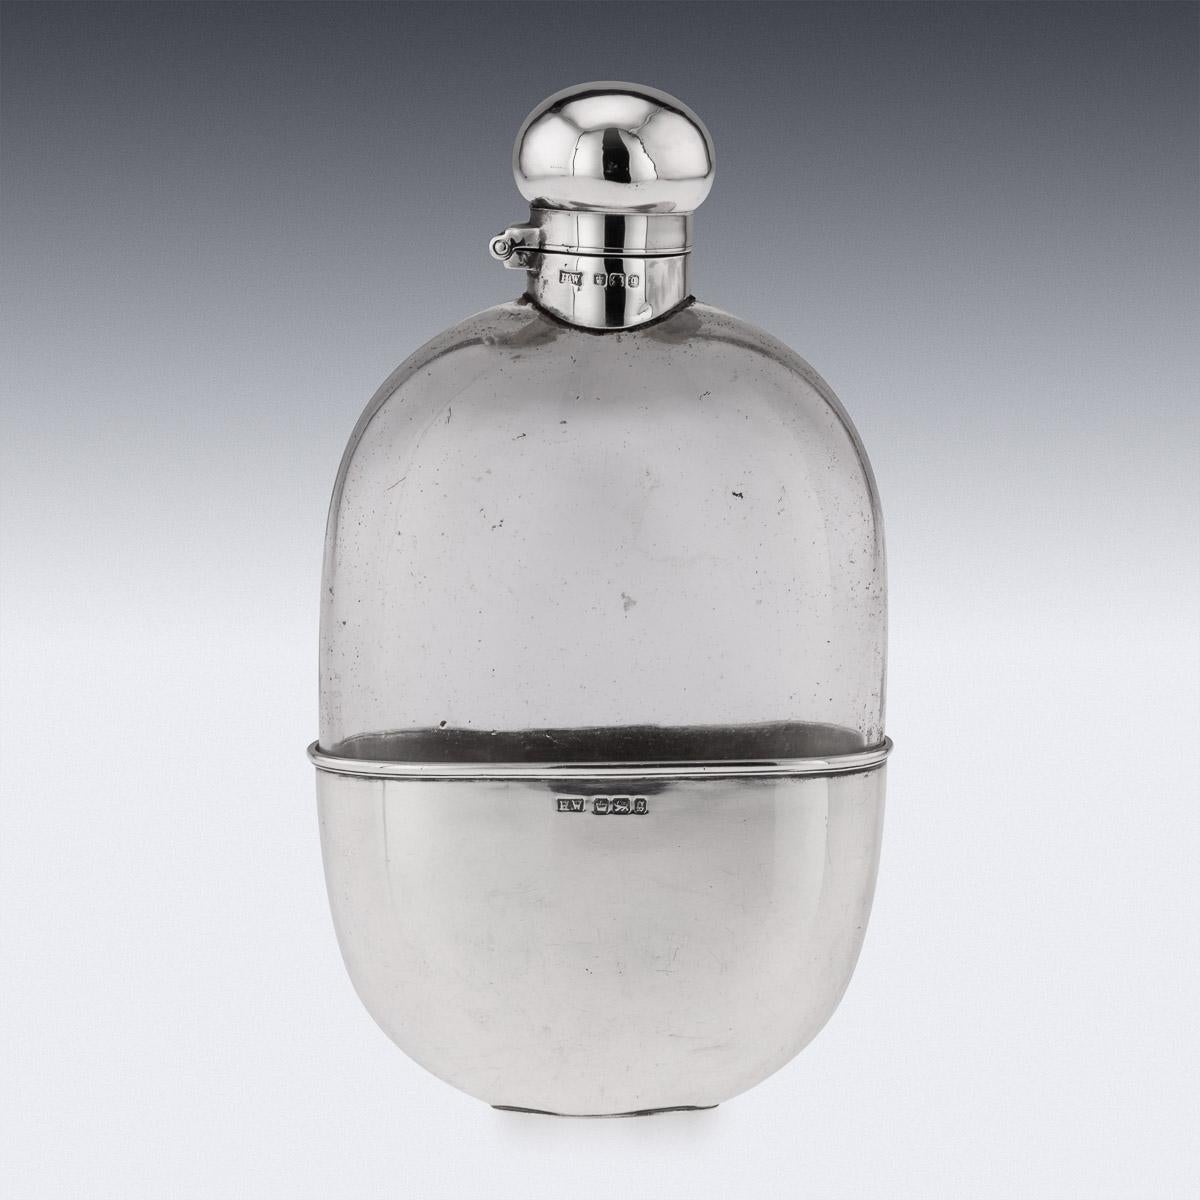 Antique early-20th century Edwardian solid silver and glass mounted hip flask, with silver hinged screw top and removable cup. Hallmarked English silver (925 standard), Sheffield, year 1910 (g), Makers mark H.W (Lee & Wigfull, Henry